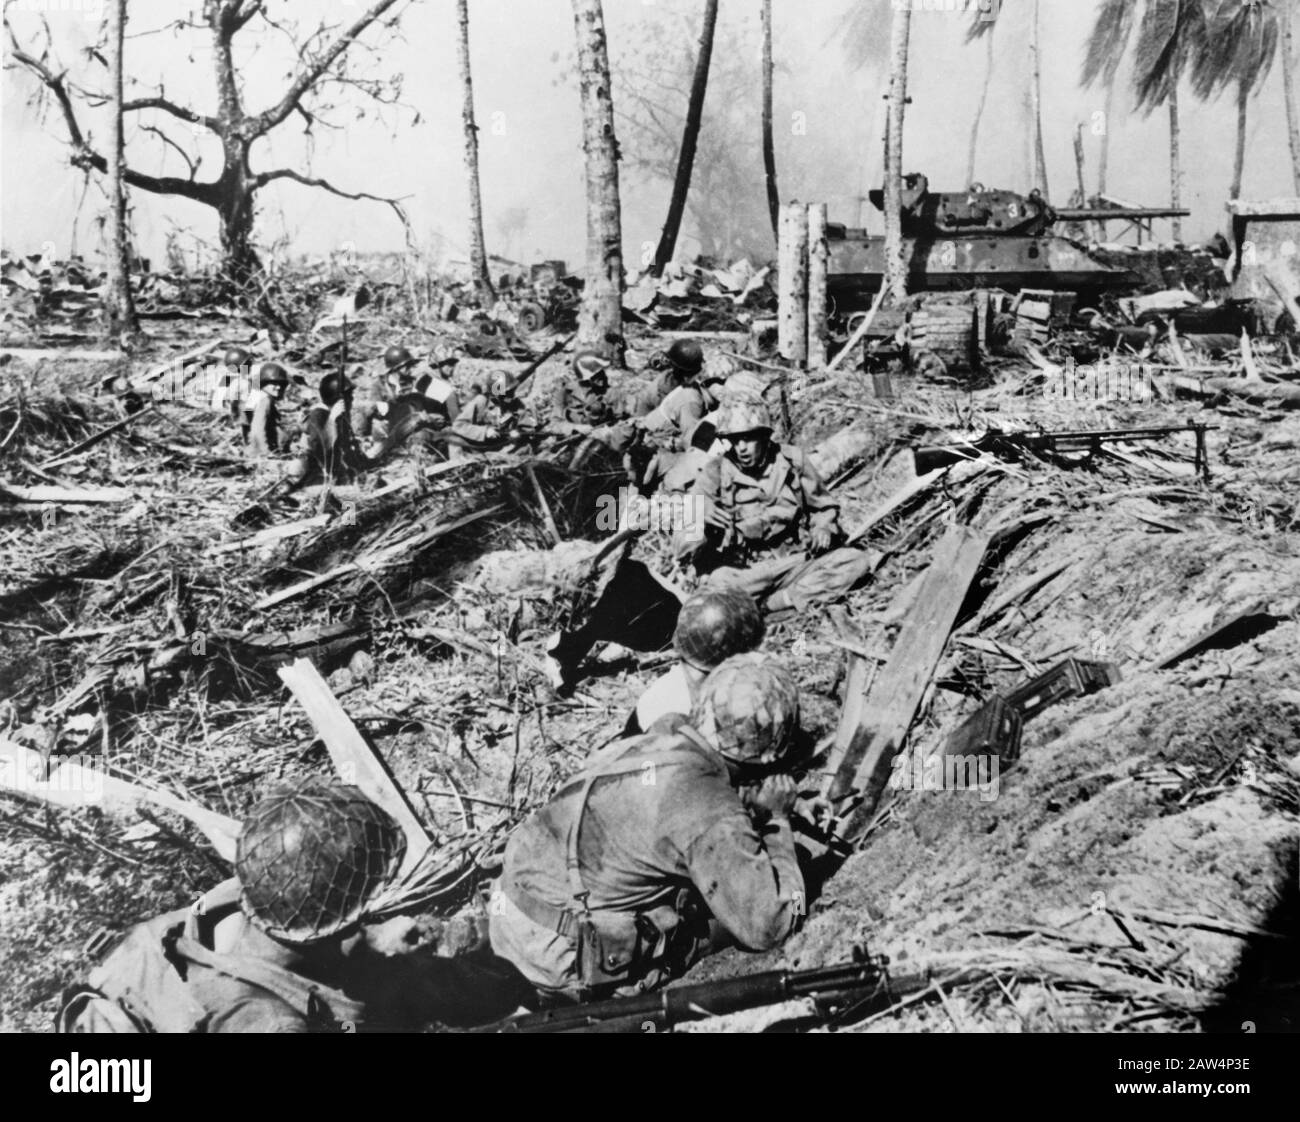 7th Armored Division of U.S. Army Halted in its Advance while Tank Blasted Path into Japanese Positions, Kwajalein Island, U.S. Army photo, February 1944 Stock Photo